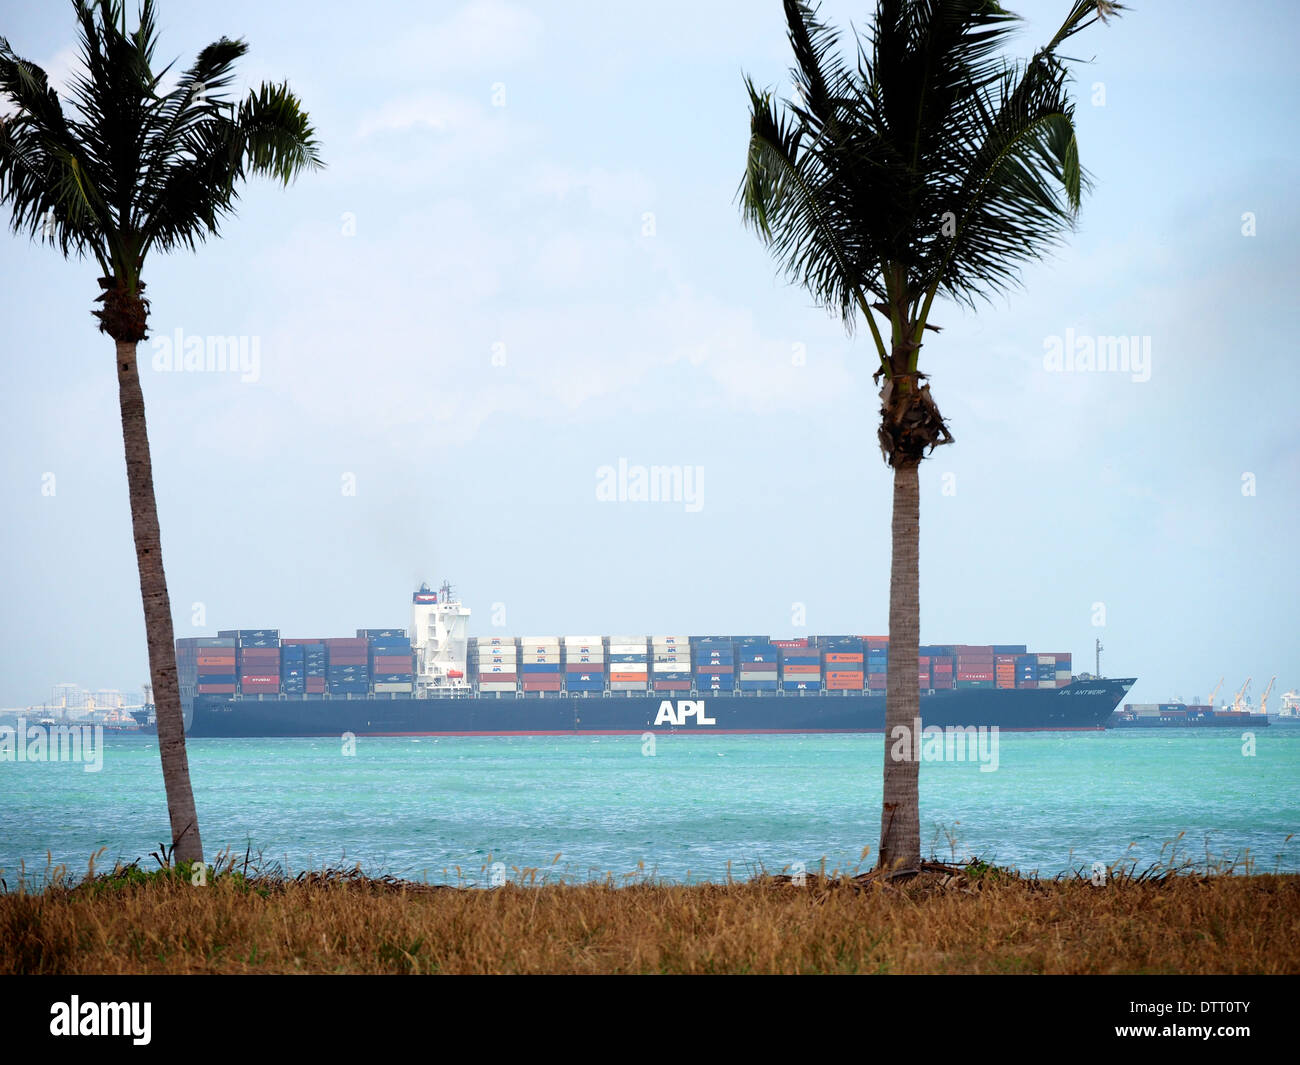 APL container ship moored near Lazurus Island, Singapore's southern island. Stock Photo